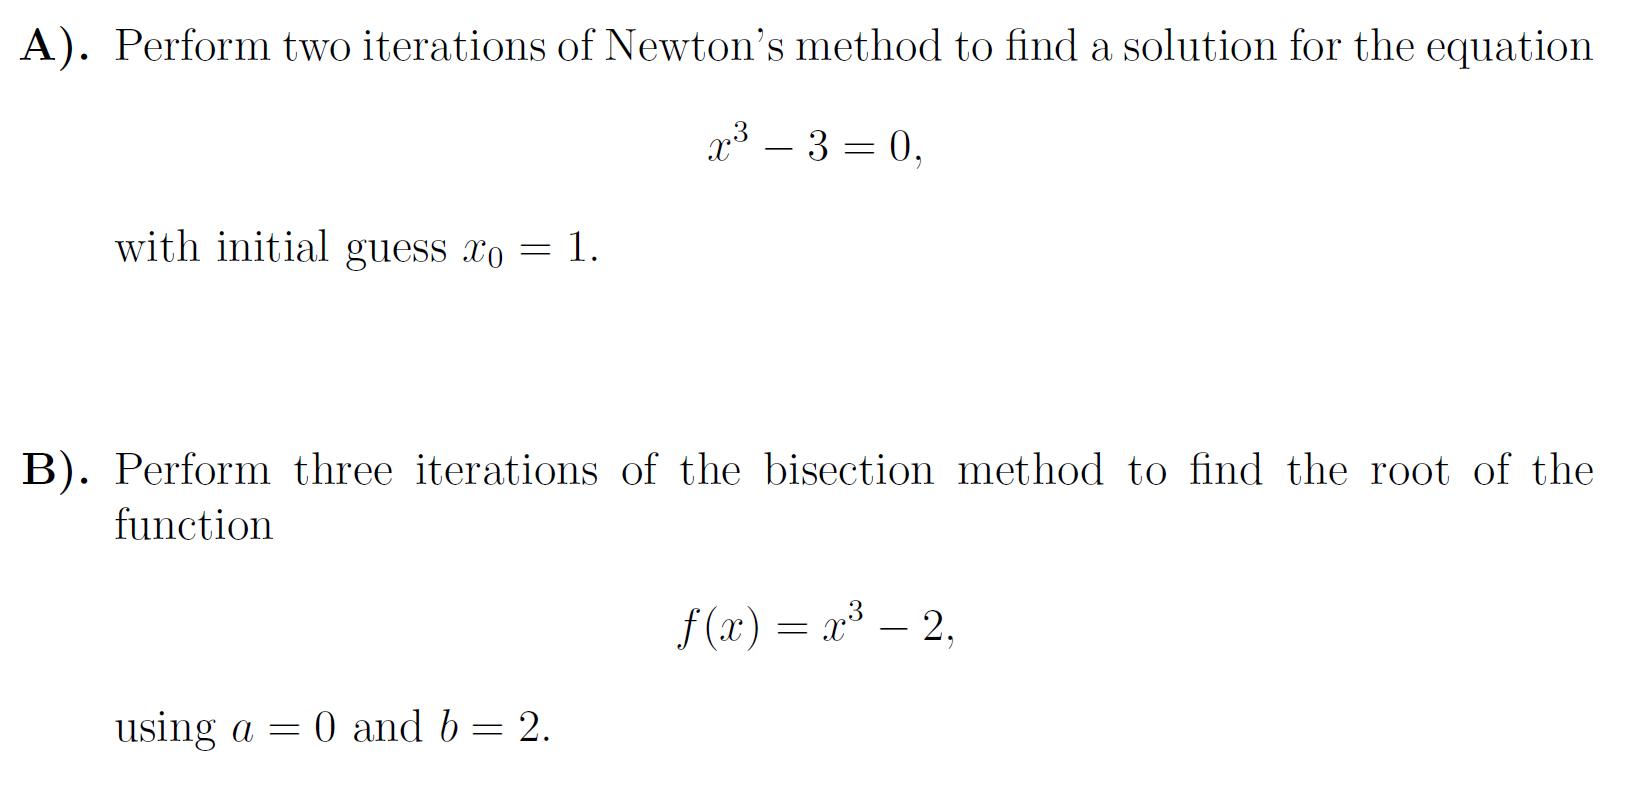 A). Perform two iterations of Newton's method to find a solution for the equation x - 3=0, with initial guess